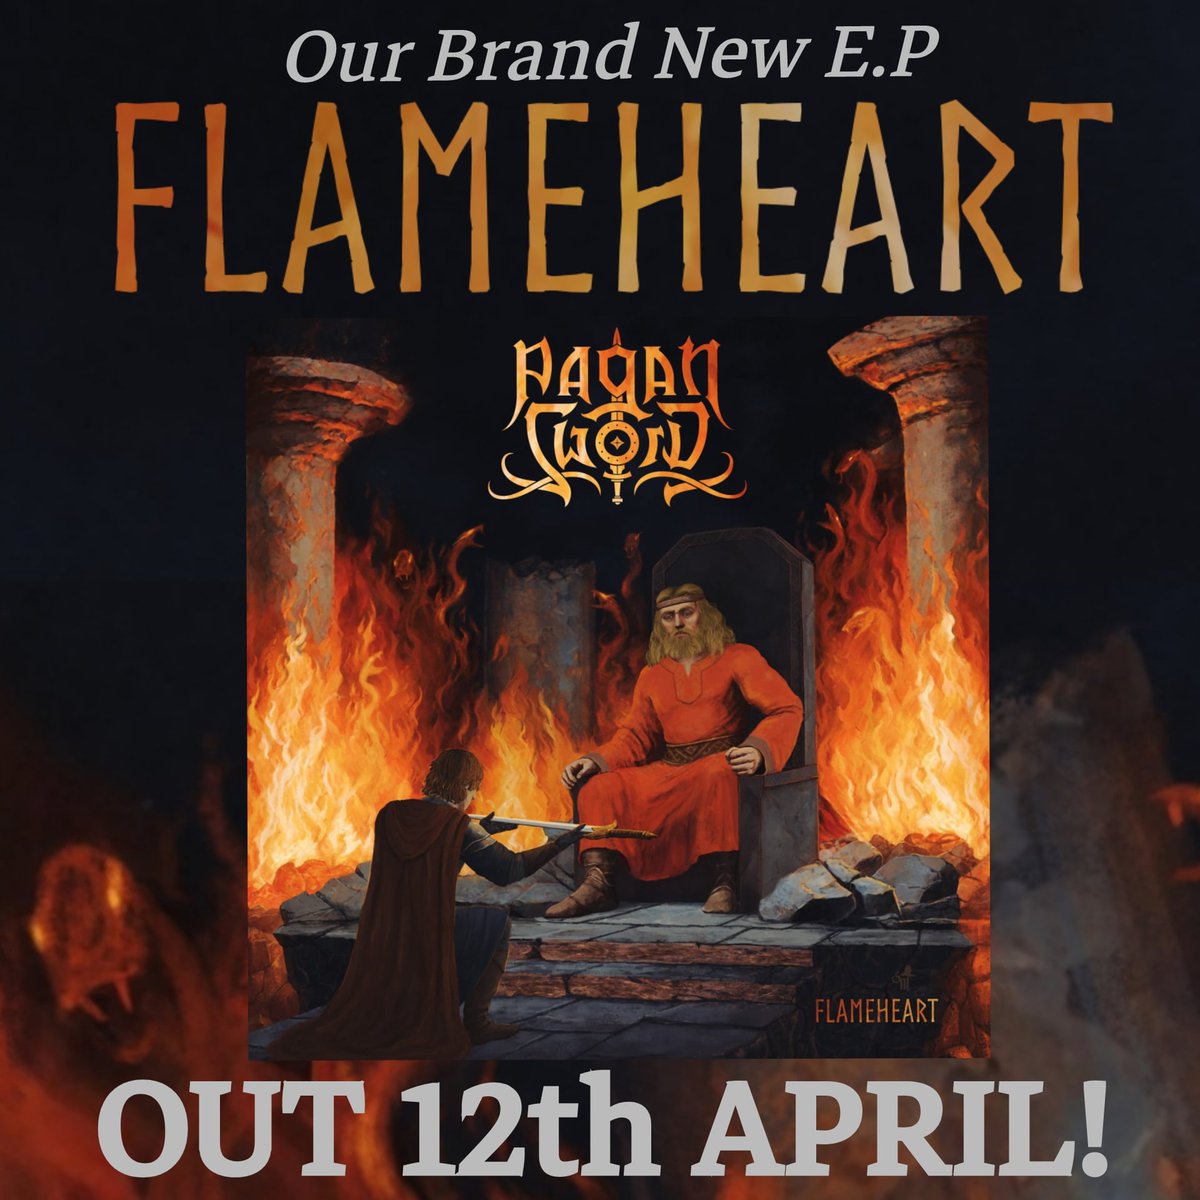 ⚔️1 WEEK TO GO!!⚔️

Our Brand New E.P 🔥'FLAMEHEART'🔥
is out on the 12TH APRIL! ⚔️

#pagansword #brandnewmusic #comingsoon #flameheart #ep #folkmetal #slavicmetal #heavymetal #melodicmetal
#ukfolkmetal #paganmetal
#polishfolkmetal #polishmetal
#drinkinghorn #music #april #date